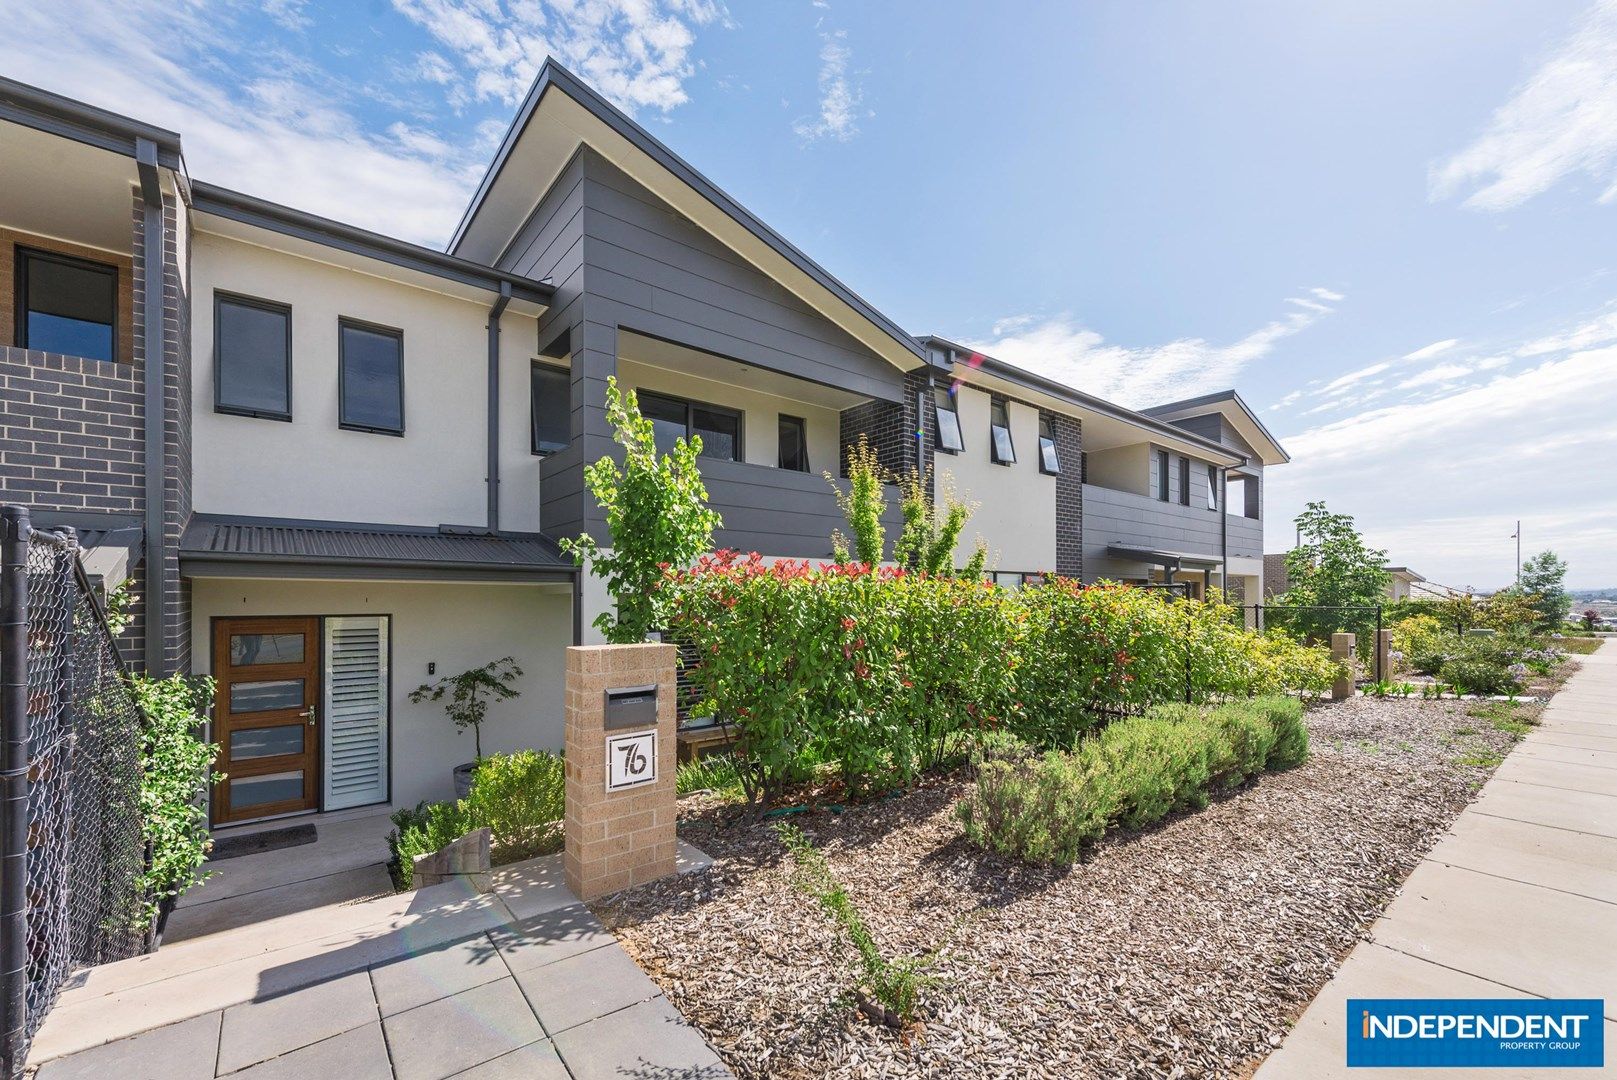 76 Peter Cullen Way, Wright ACT 2611, Image 0